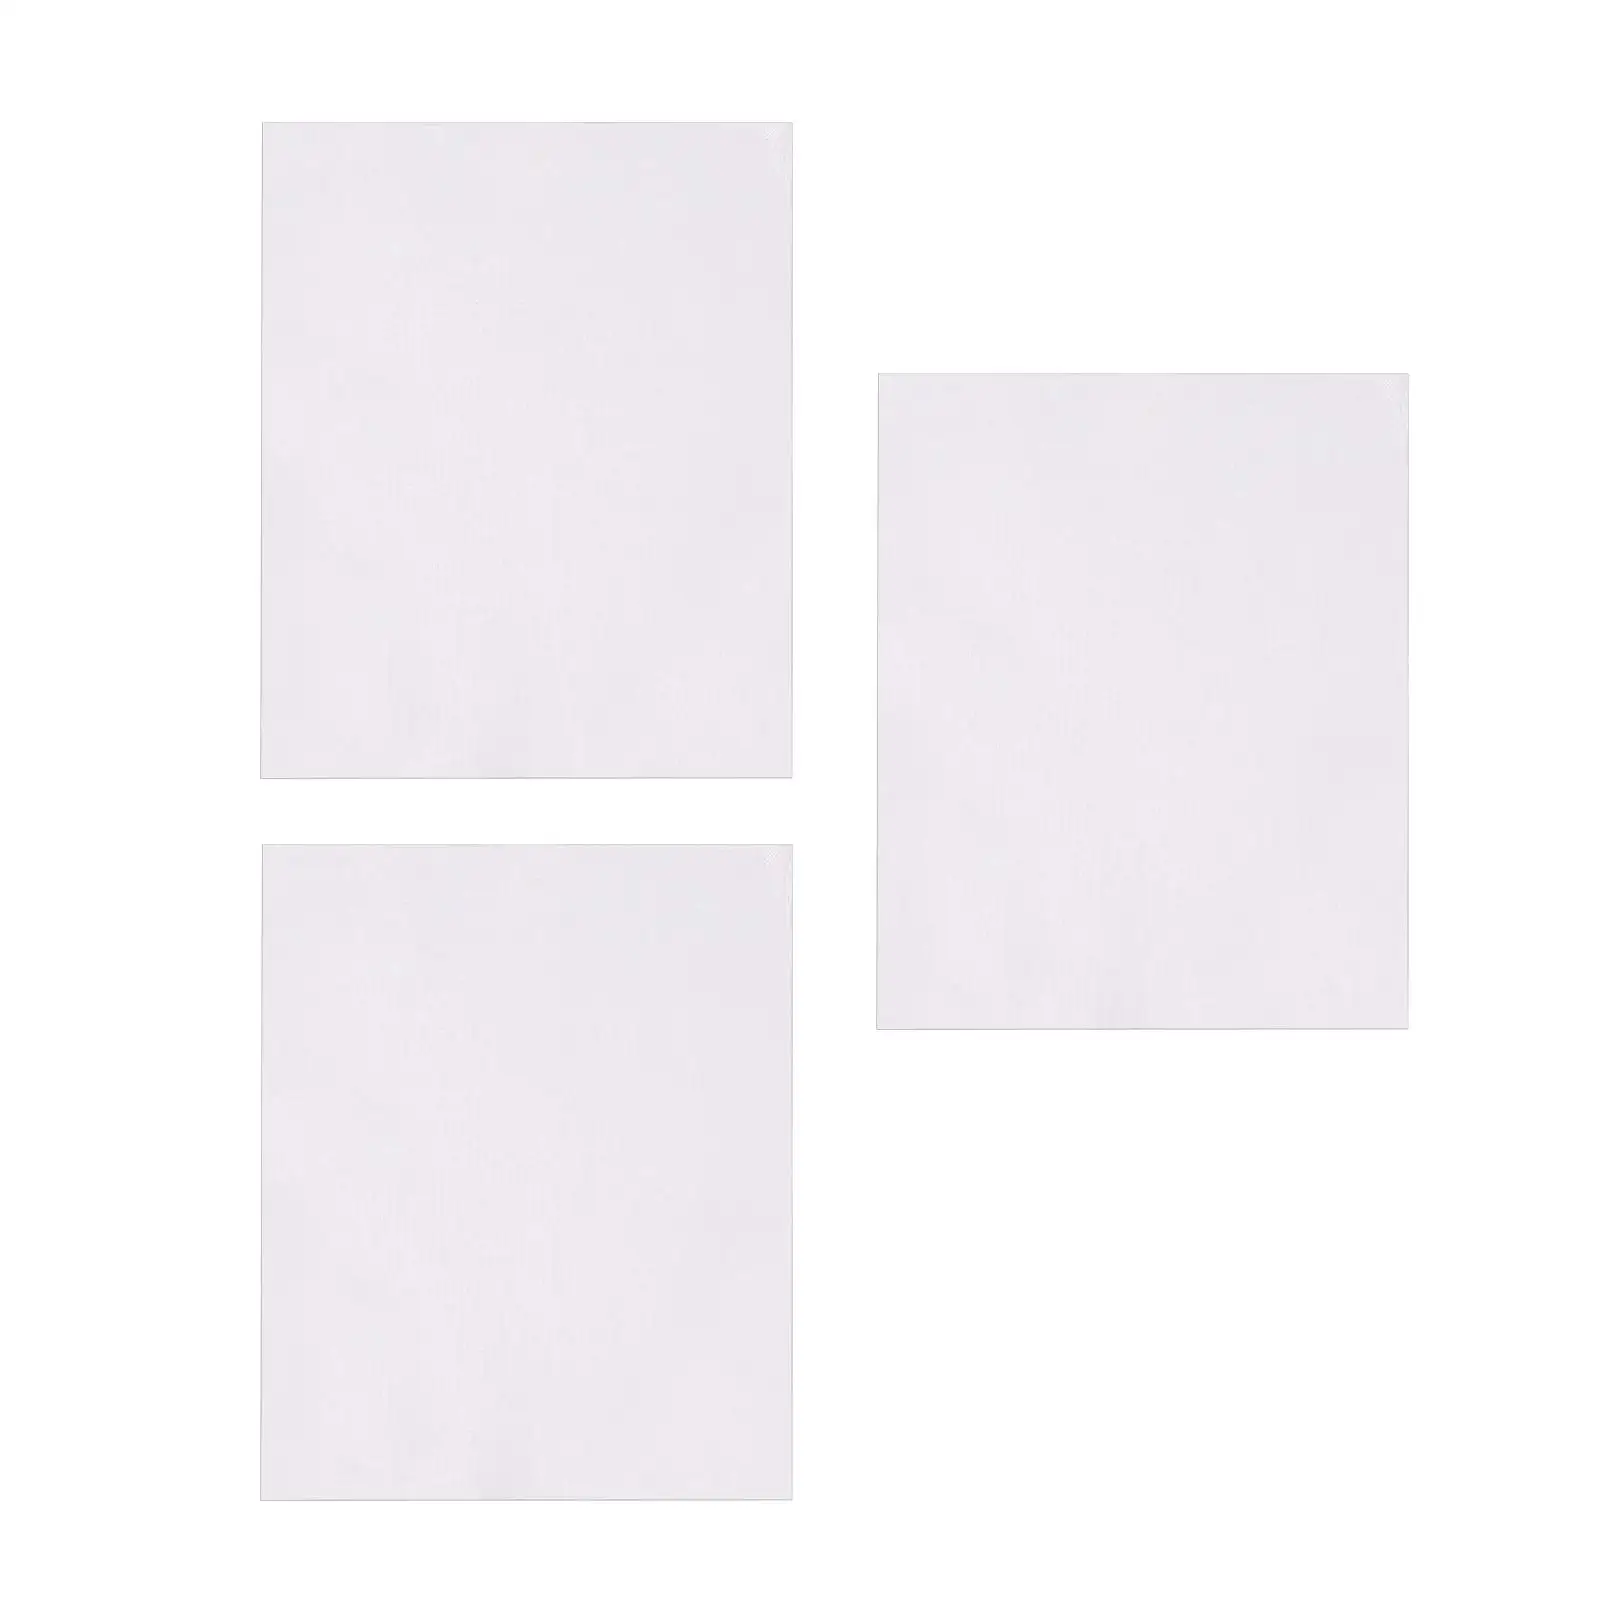 3Pcs Cotton Artist Blank Canvas Boards Acrylic Oil Painting Home Wall Decor Artwork Canvas Panels for Oil Painting Gouache Paint